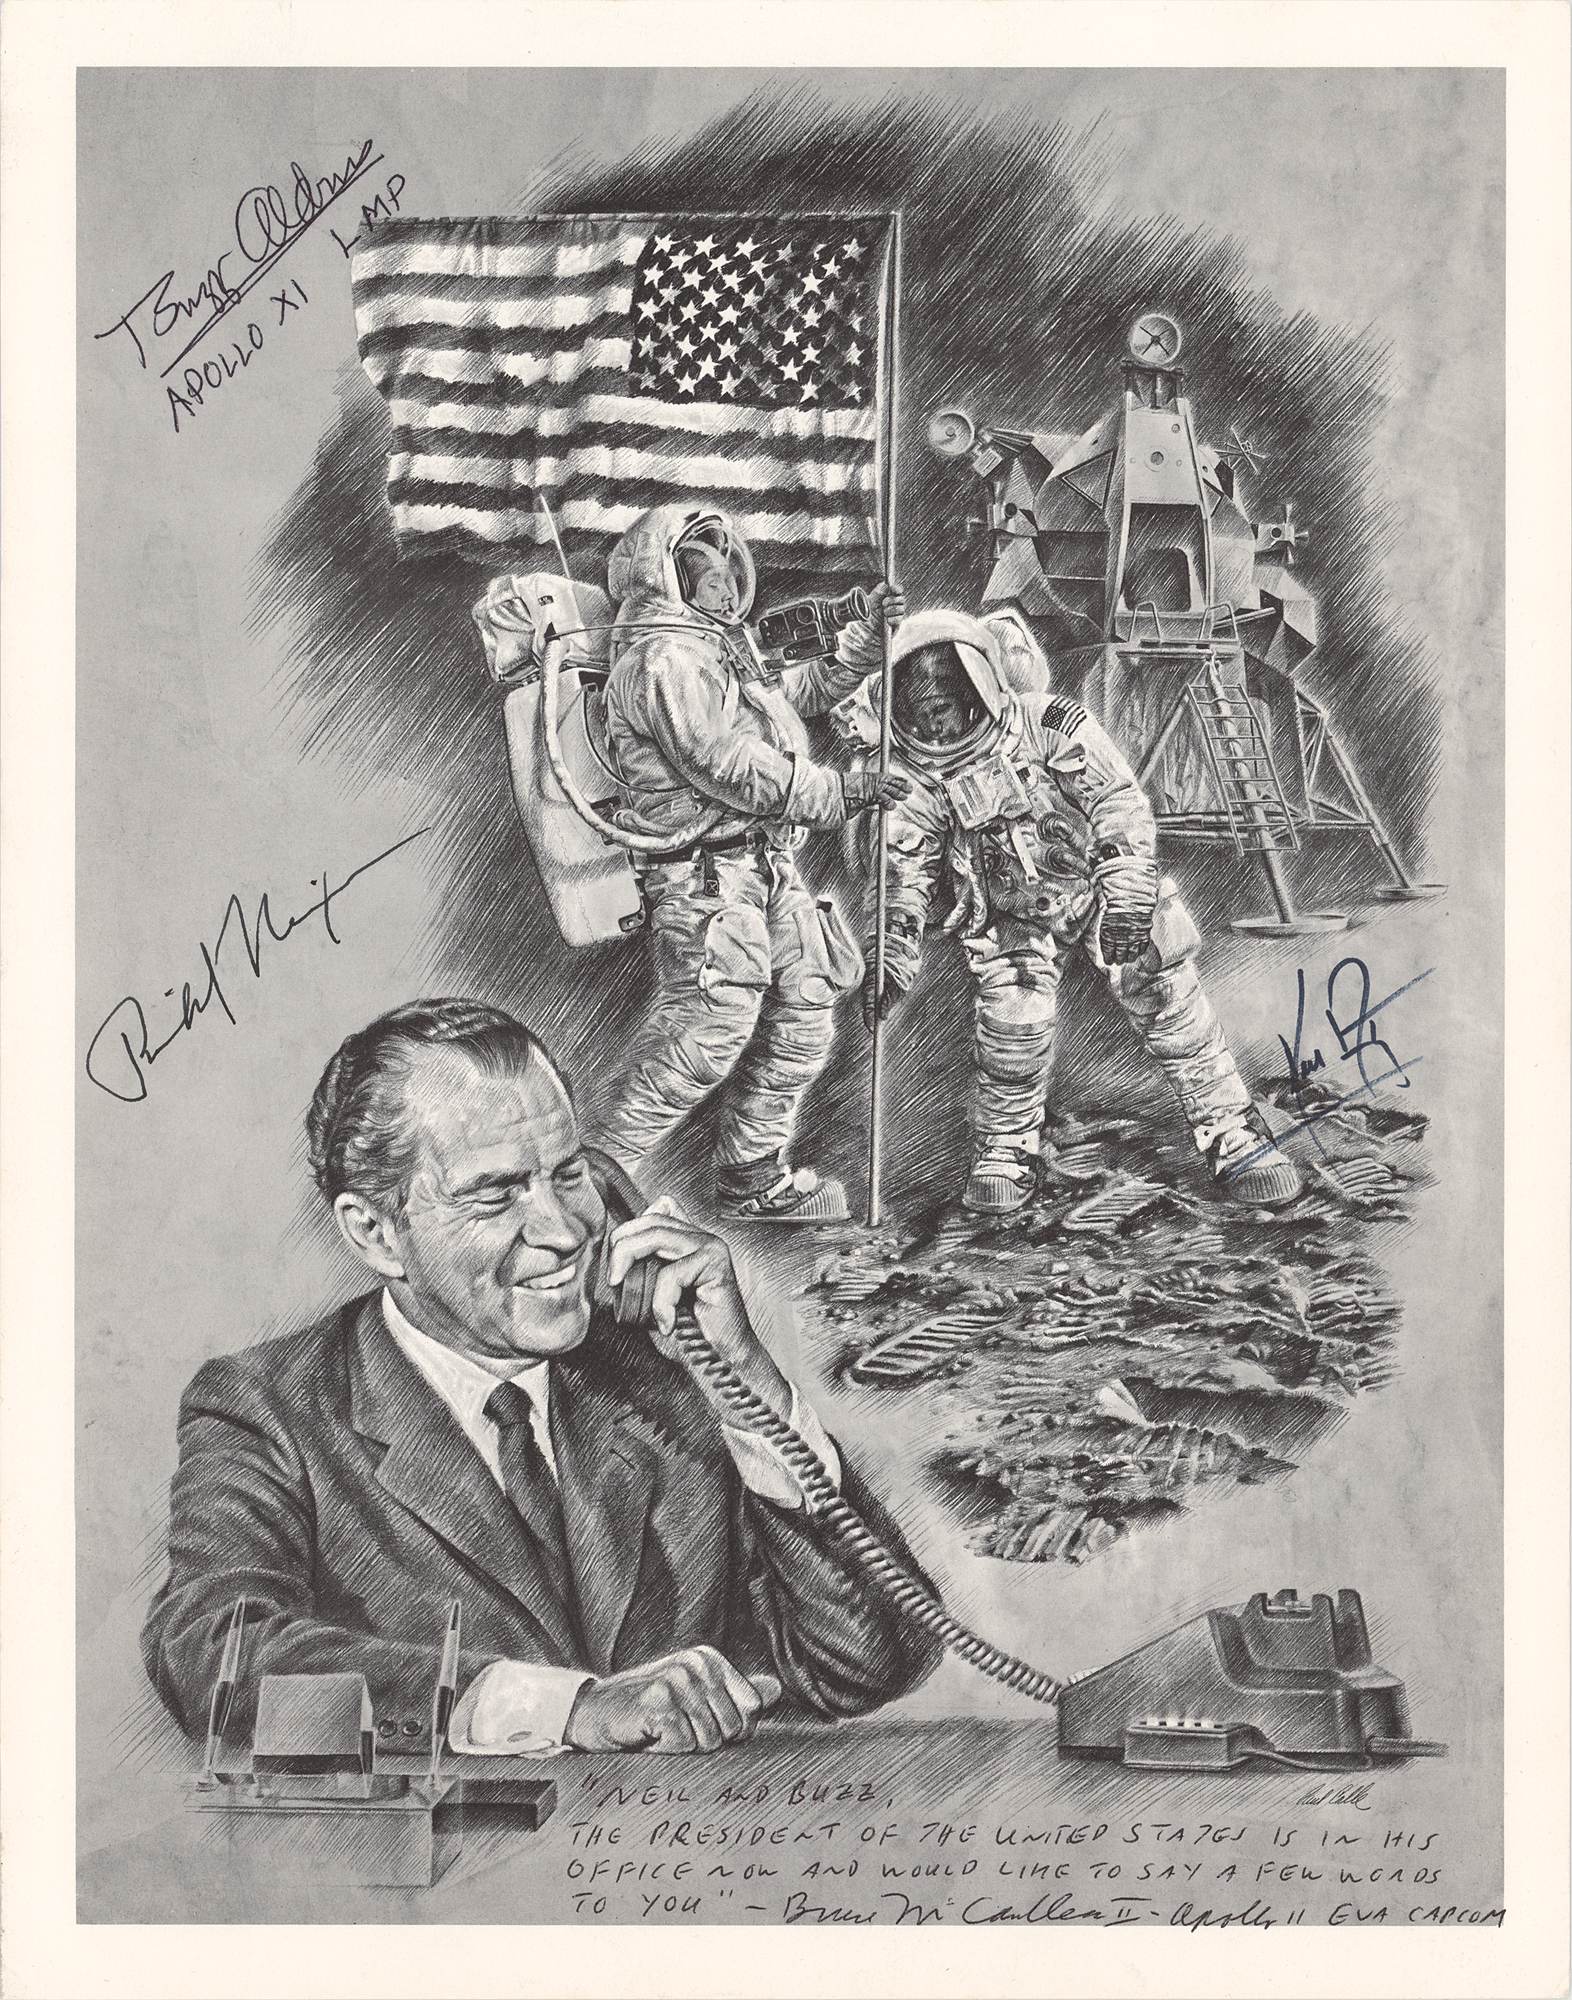 Lot #3206 Apollo 11 Print Signed by Armstrong, Aldrin, Nixon, and McCandless